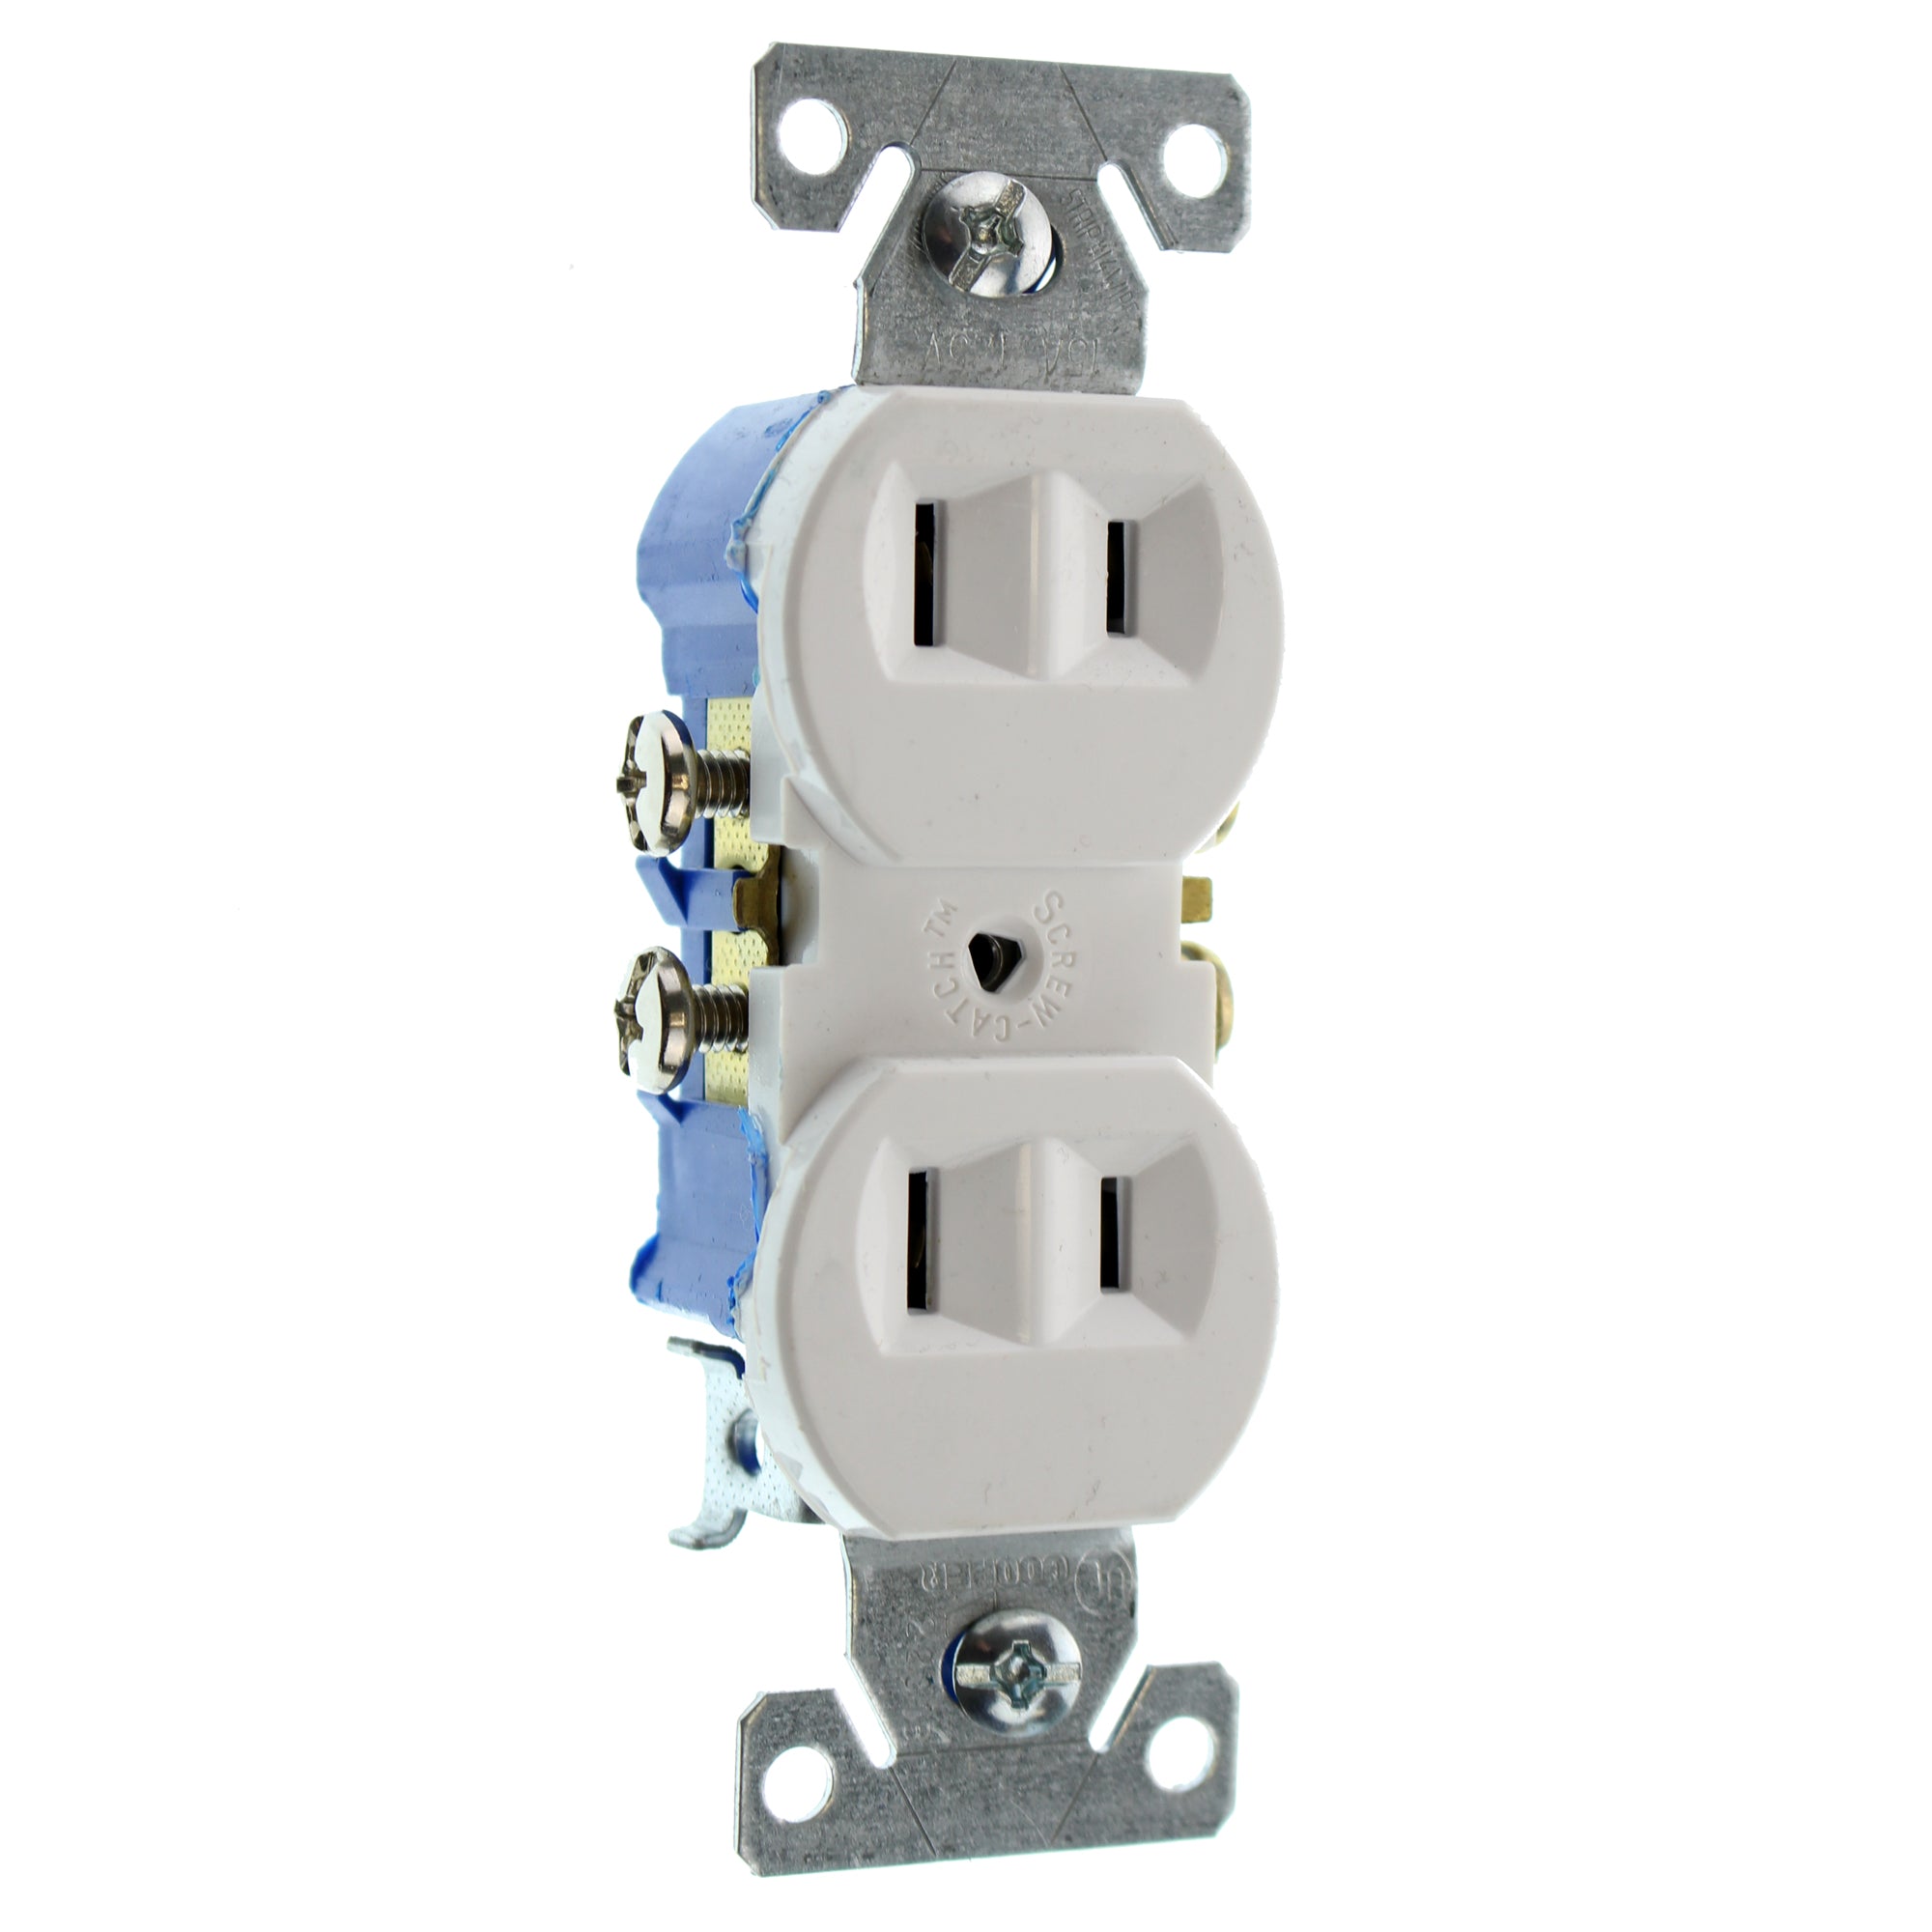 EATON, EATON COOPER 736W-SP-L RECETPACLE OUTLET, NON-GROUNDING, 2-WIRE, 15A 120V, WHITE